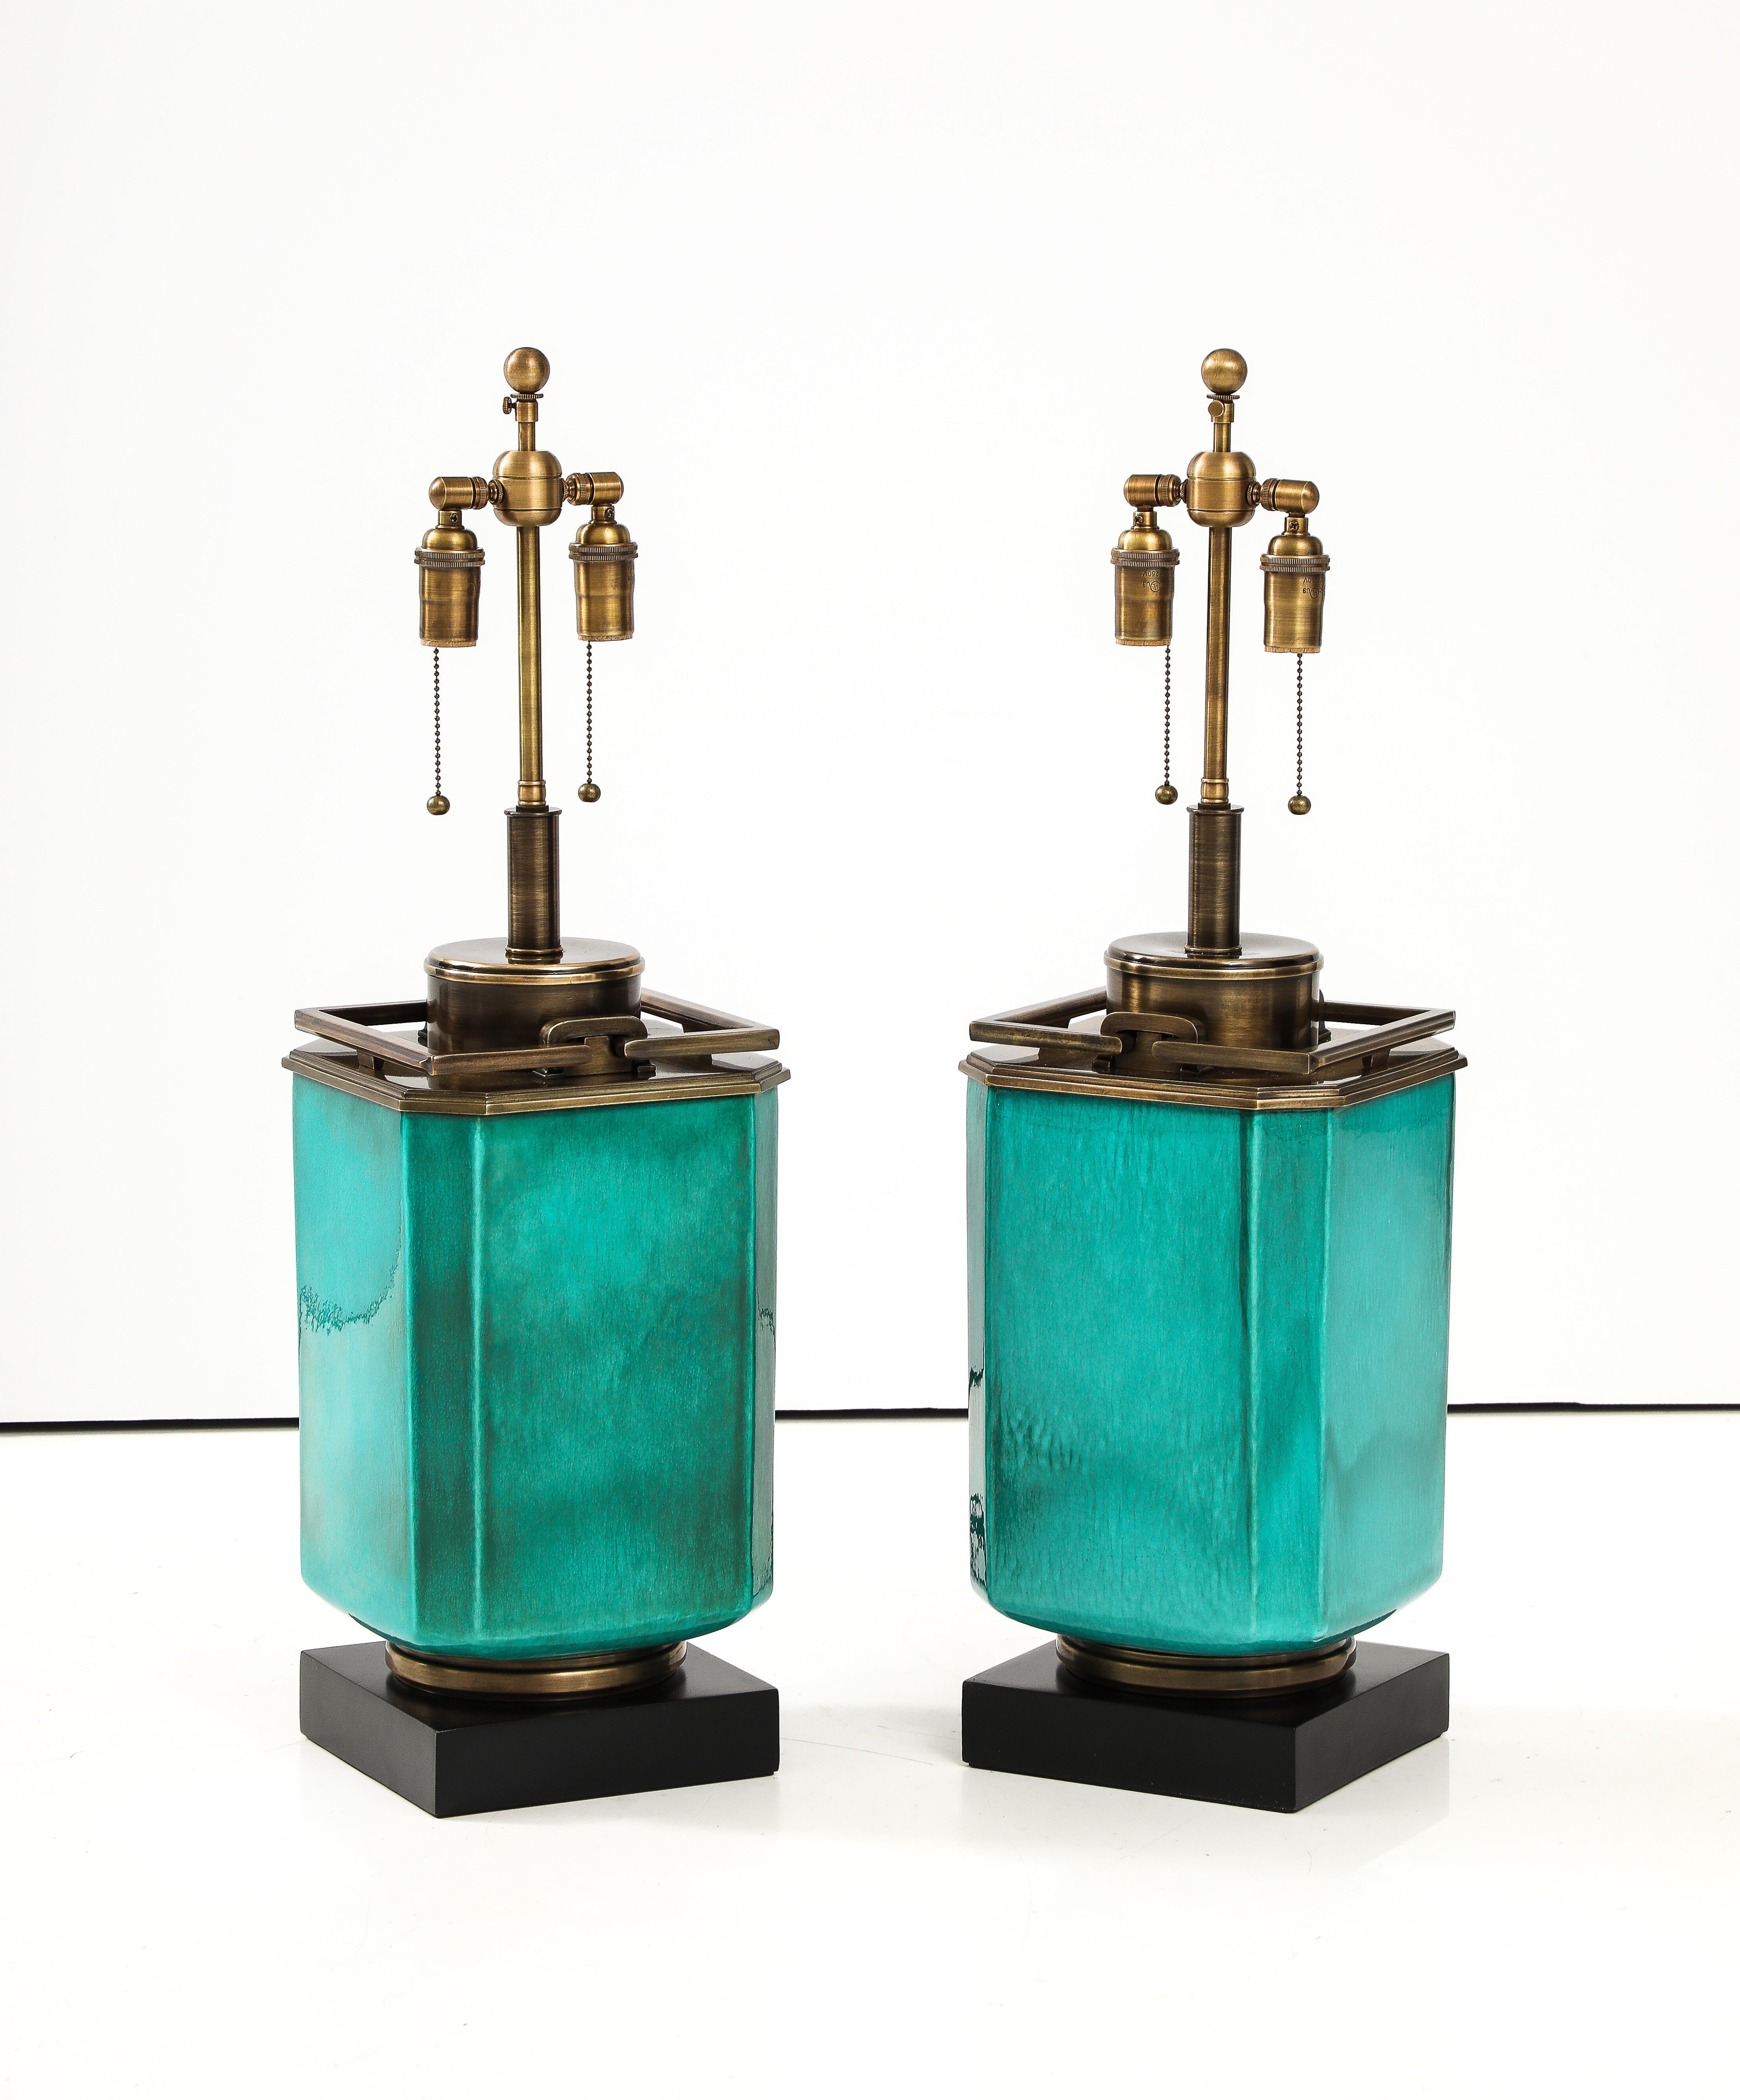 Mid-20th Century Pair of 1960's Large Ceramic Lamps With a Jade Crackle Glaze Finish by Stiffel. For Sale